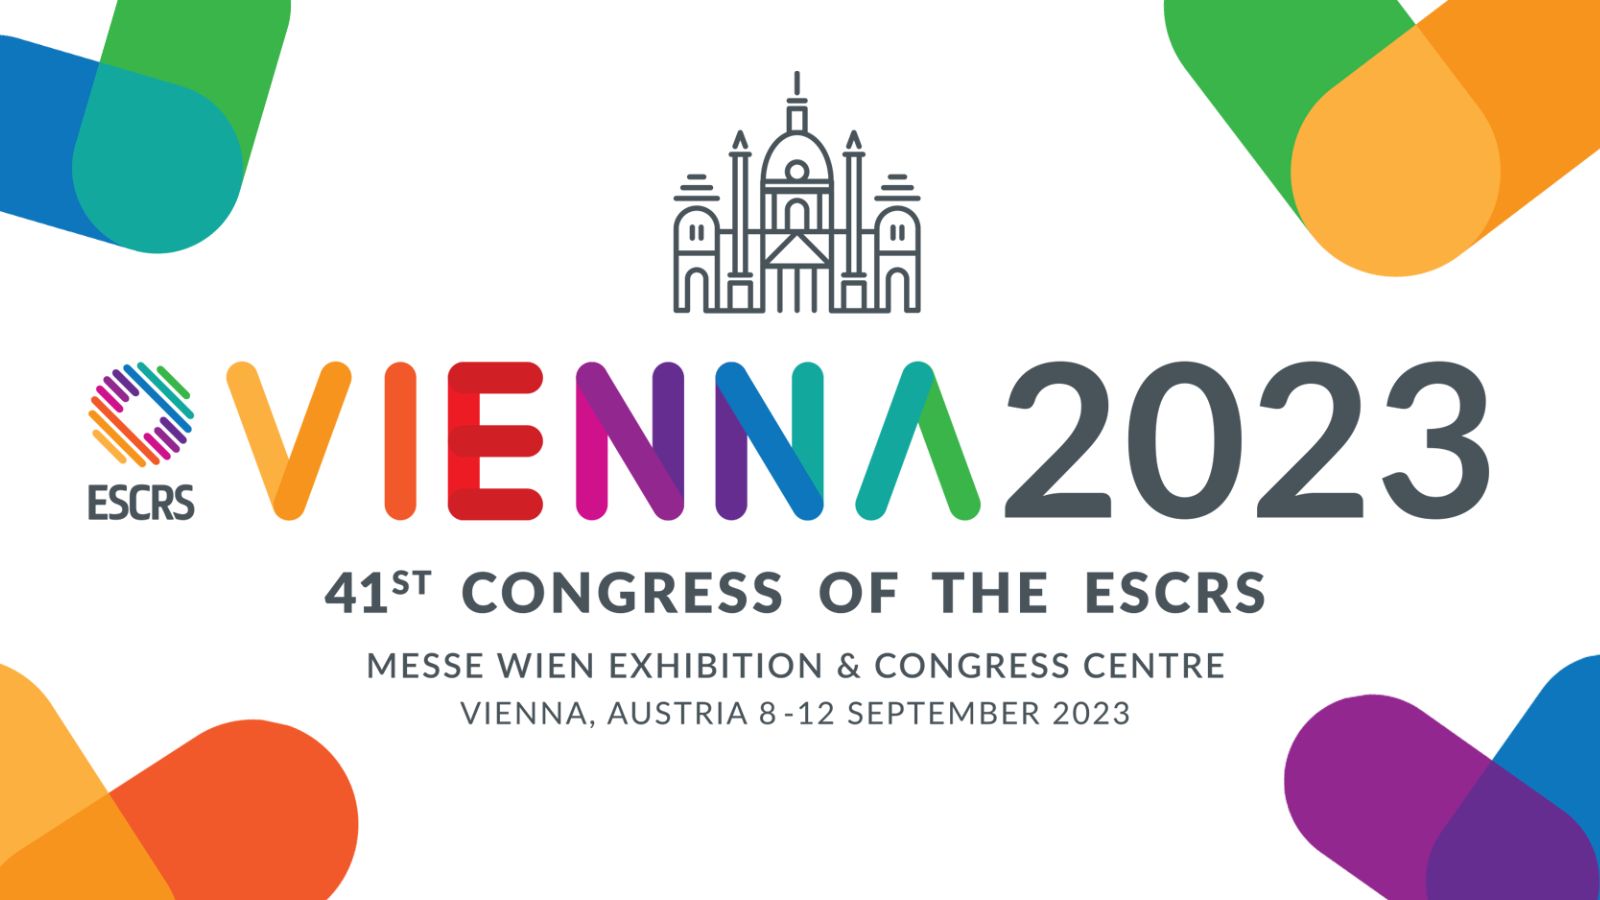 41st Congress of the ESCRS | 8 - 12 September 2023 | Messe Wien Exhibition and Congress Centre, Vienna